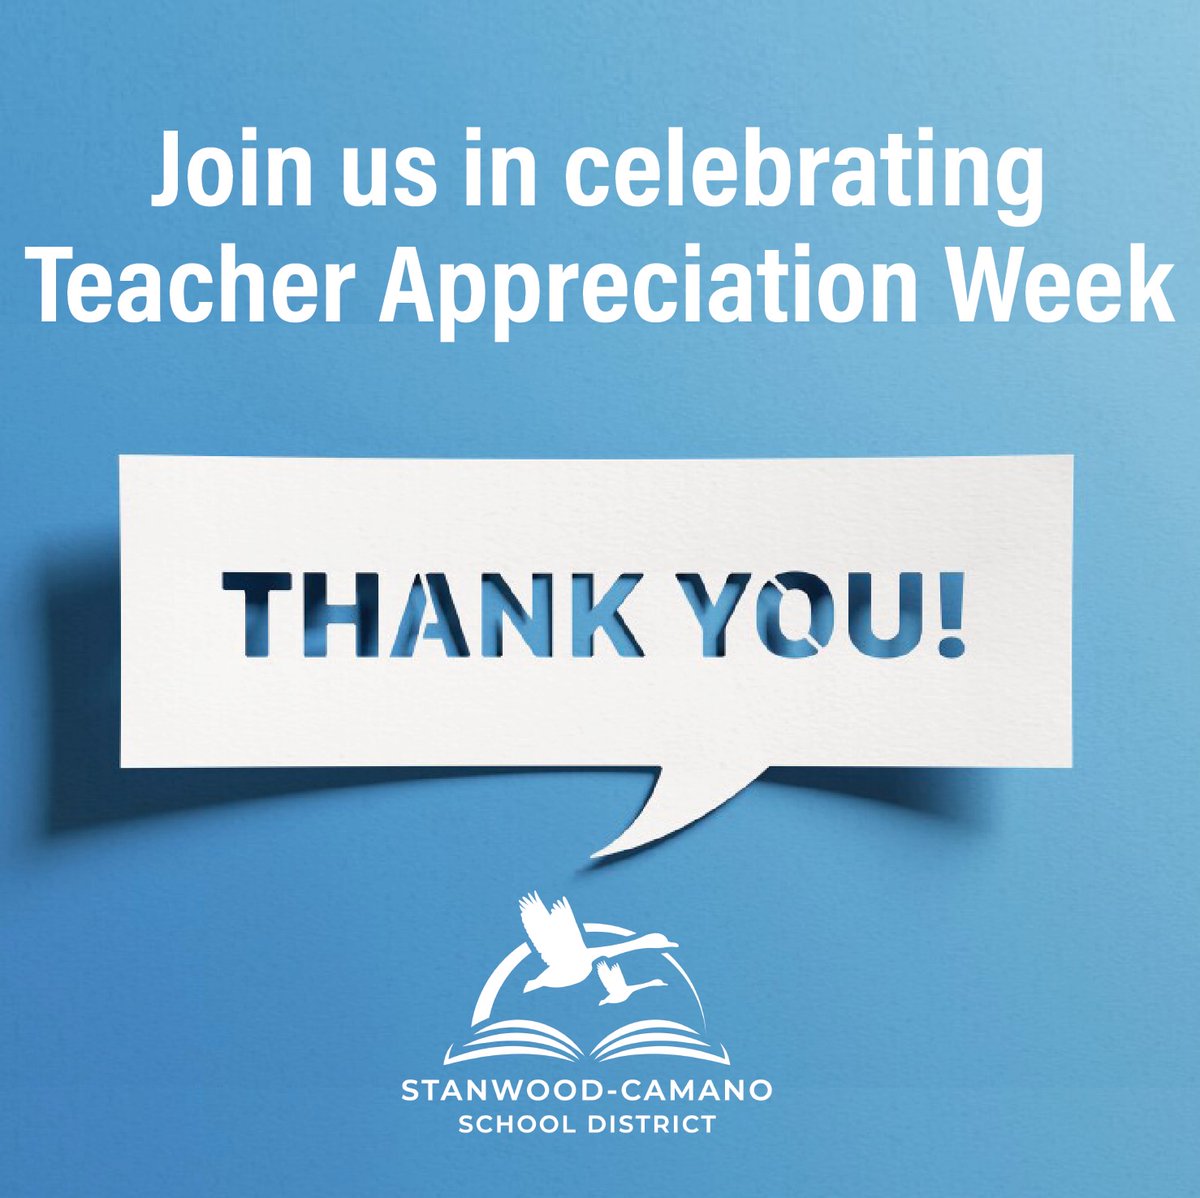 All this week we will celebrate teachers! #TeacherAppreciationWeek is a time to recognize the incredible educators who dedicate themselves to shaping the minds of our students. Thank you for your making a difference in the lives of so many!